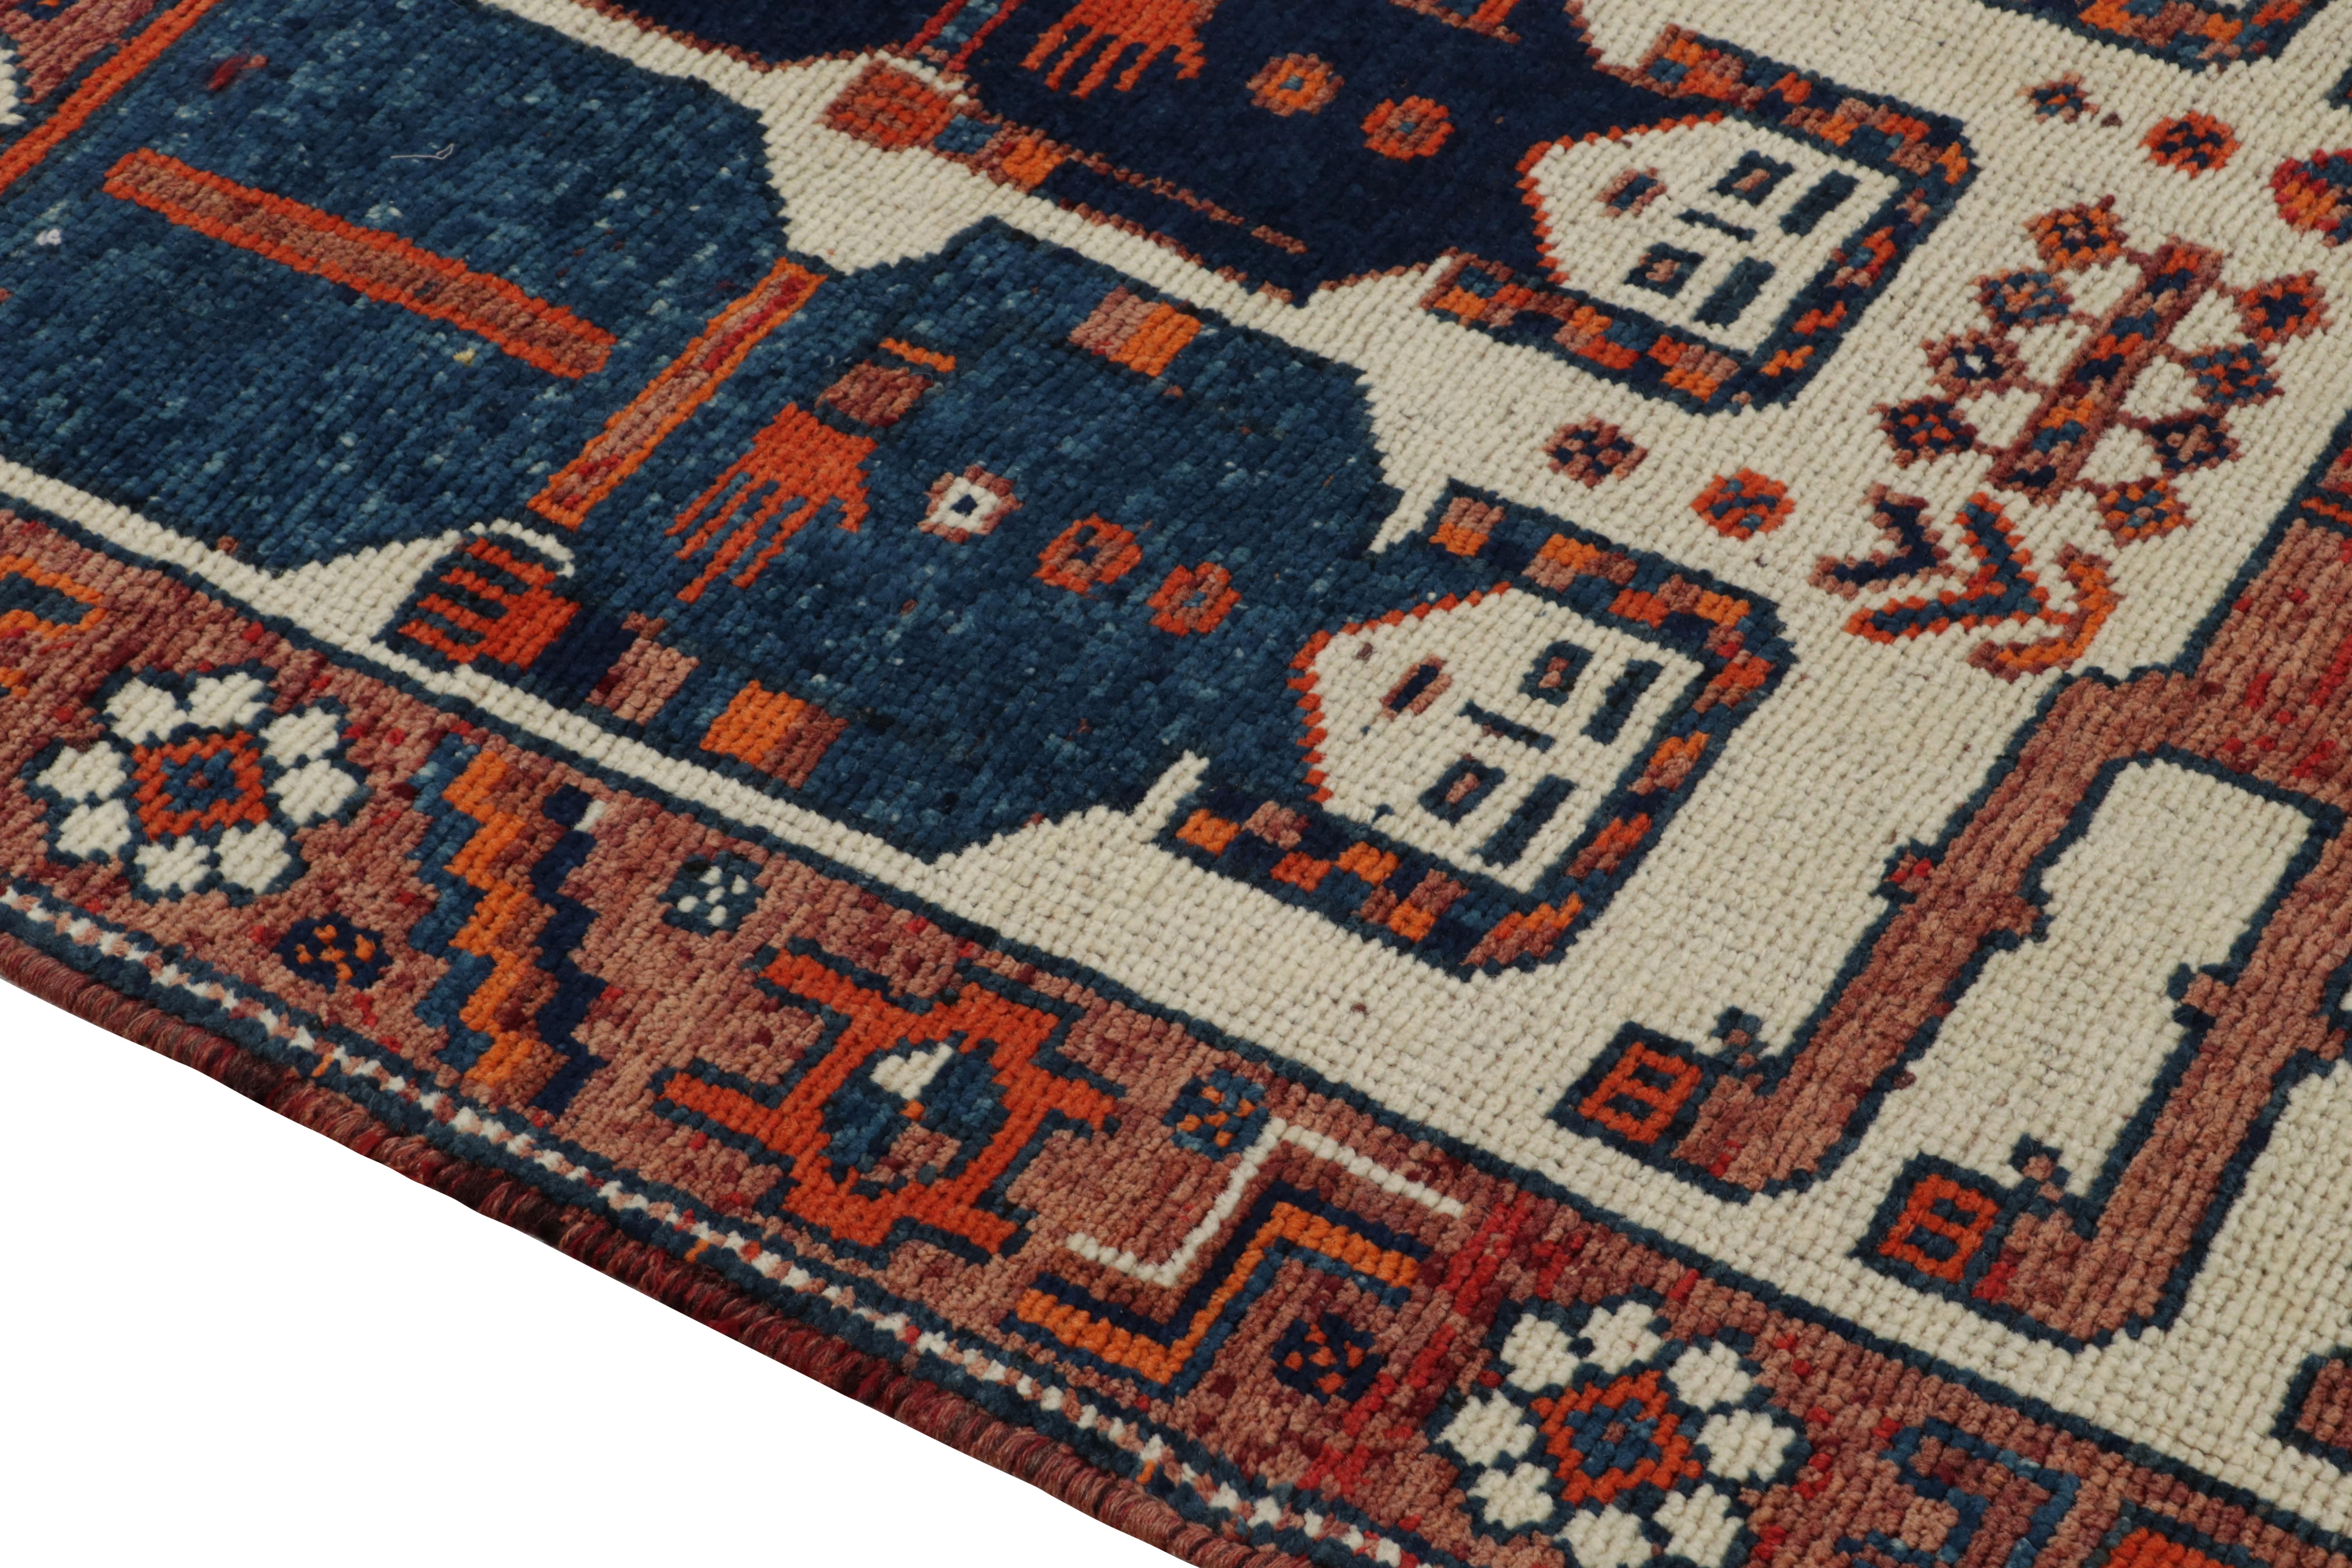 1950s Vintage Tribal Rug in, Blue and Orange Pictorial Motifs by Rug & Kilim In Good Condition For Sale In Long Island City, NY